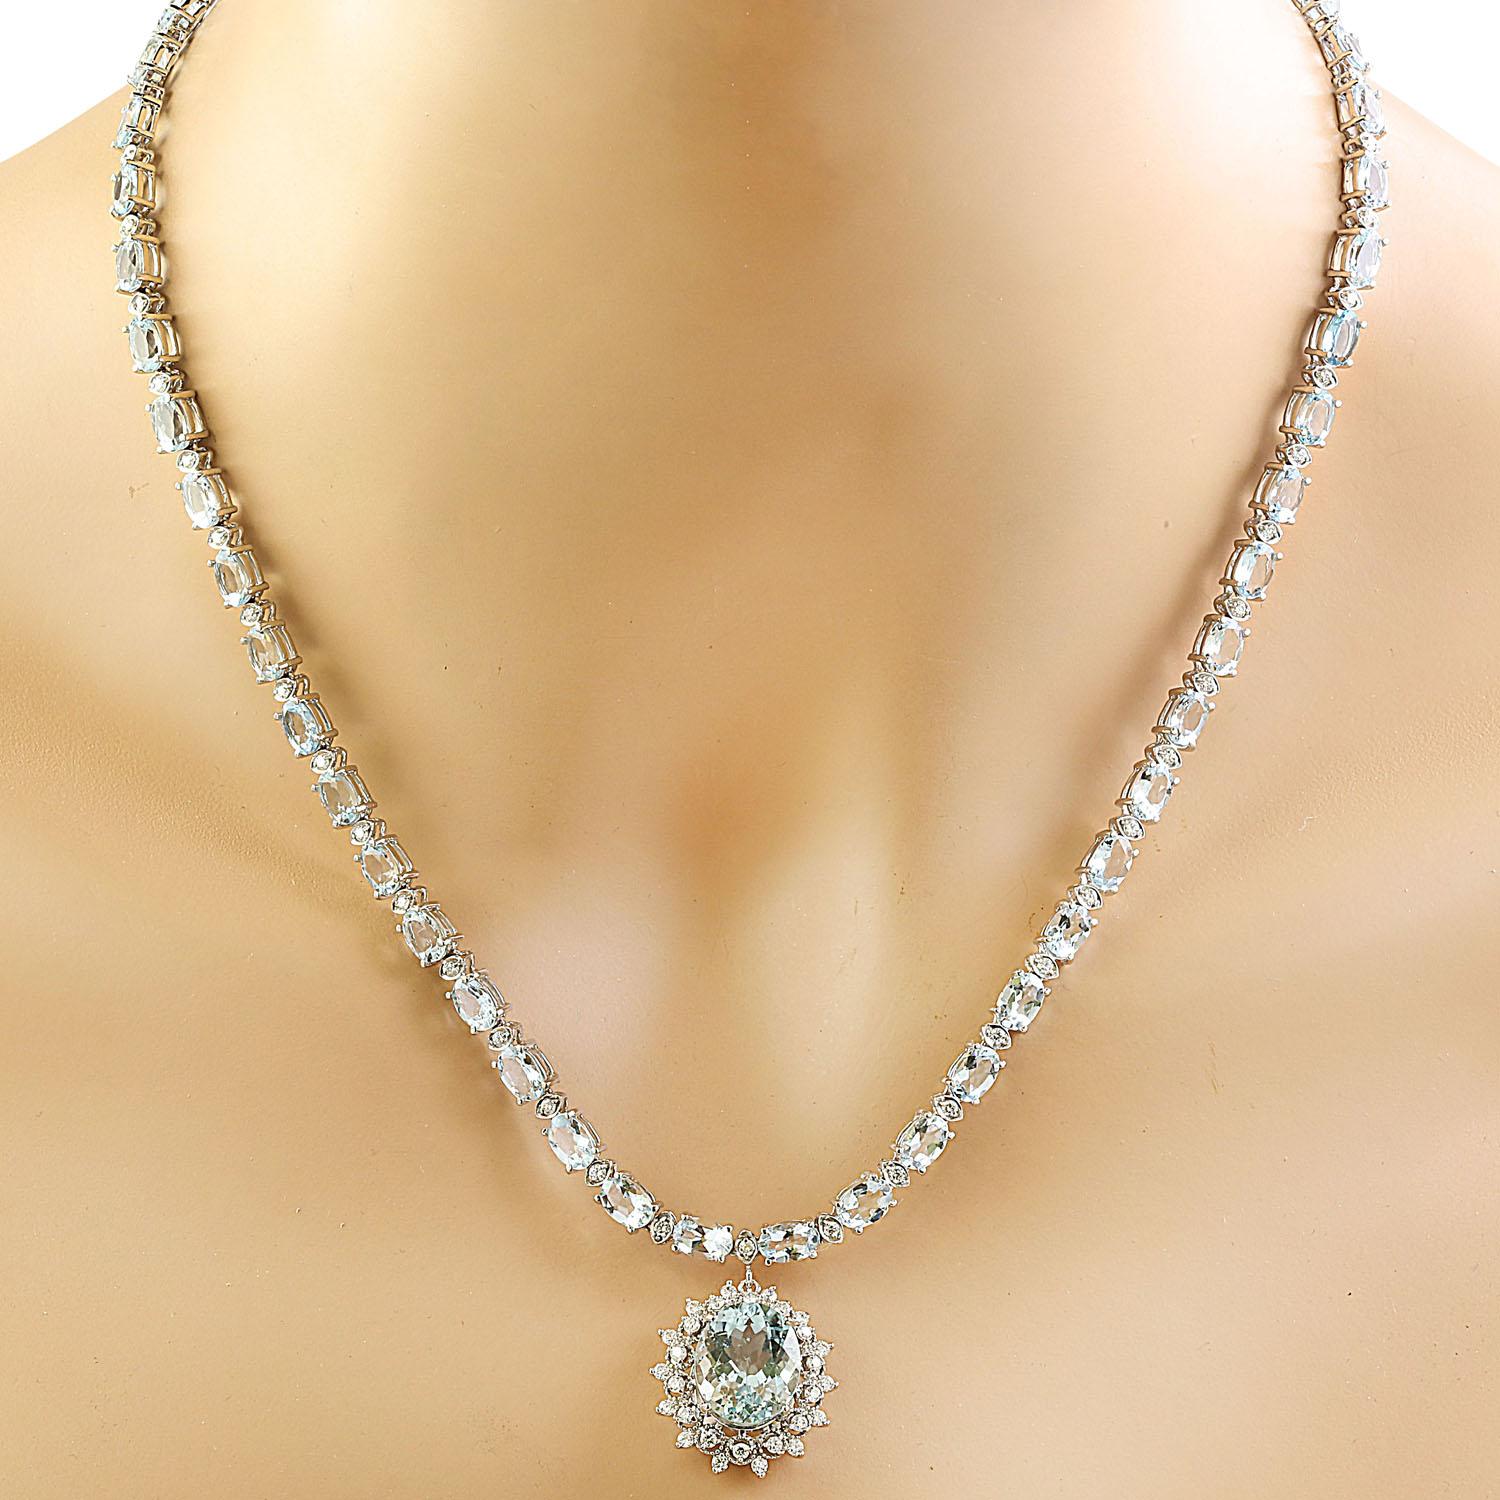 32.04 Carat Natural Aquamarine 14 Karat Solid White Gold Diamond Necklace
Stamped: 14K
Total Necklace Weight: 26.3 Grams
Necklace Length: 18 Inches
Center Aquamarine Weight: 6.29 Carat (13.00x11.00 Millimeters)
Side Aquamarine WeighT 24.00 Carat